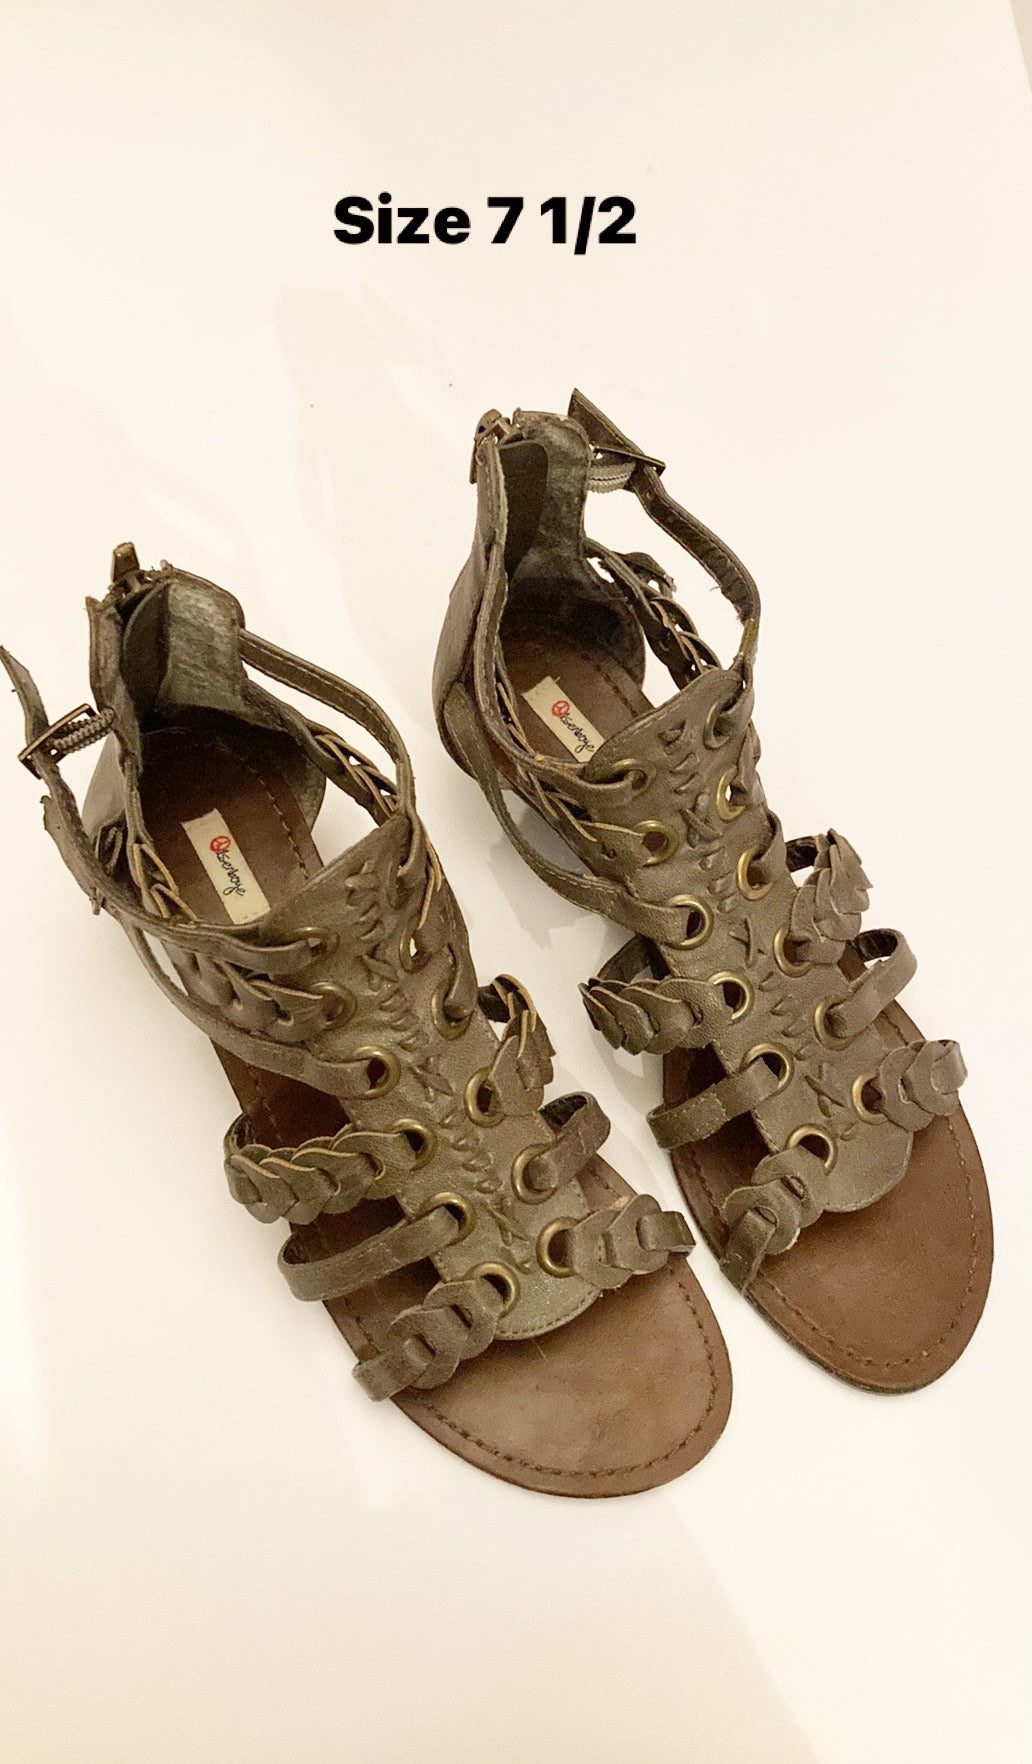 Size 7 1/2-Women’s Gladiator Style Sandal-Pickup possible in West Chester, Norwood, Blue Ash, or Reading outside of bi-annual sales event pickup.